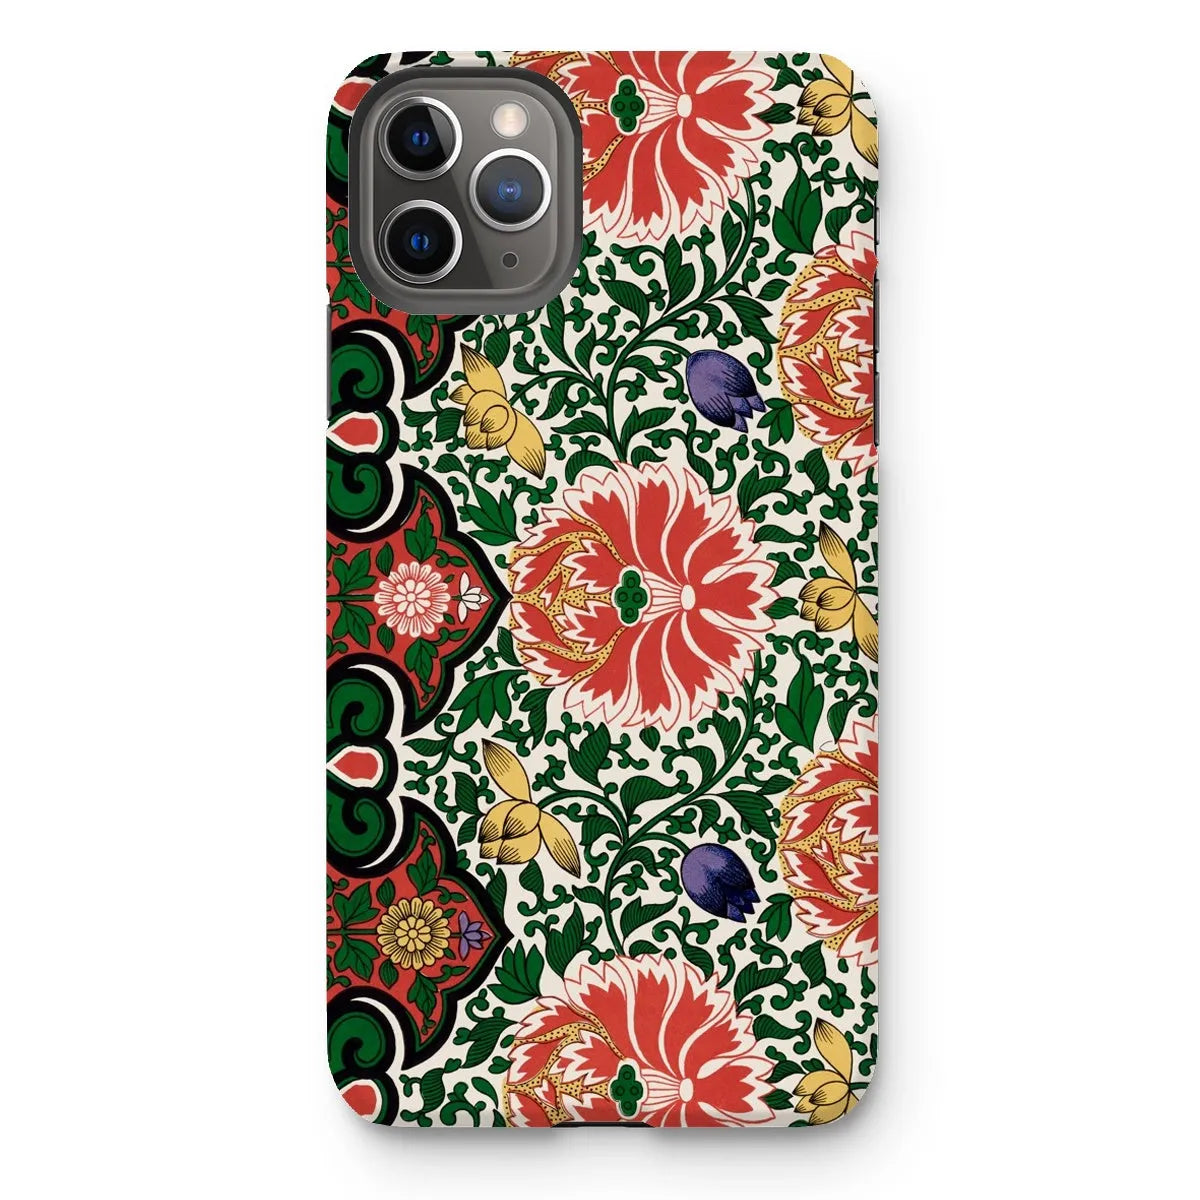 Chinese Floral Pattern Aesthetic Art Phone Case - Owen Jones - Iphone 11 Pro Max / Matte - Mobile Phone Cases